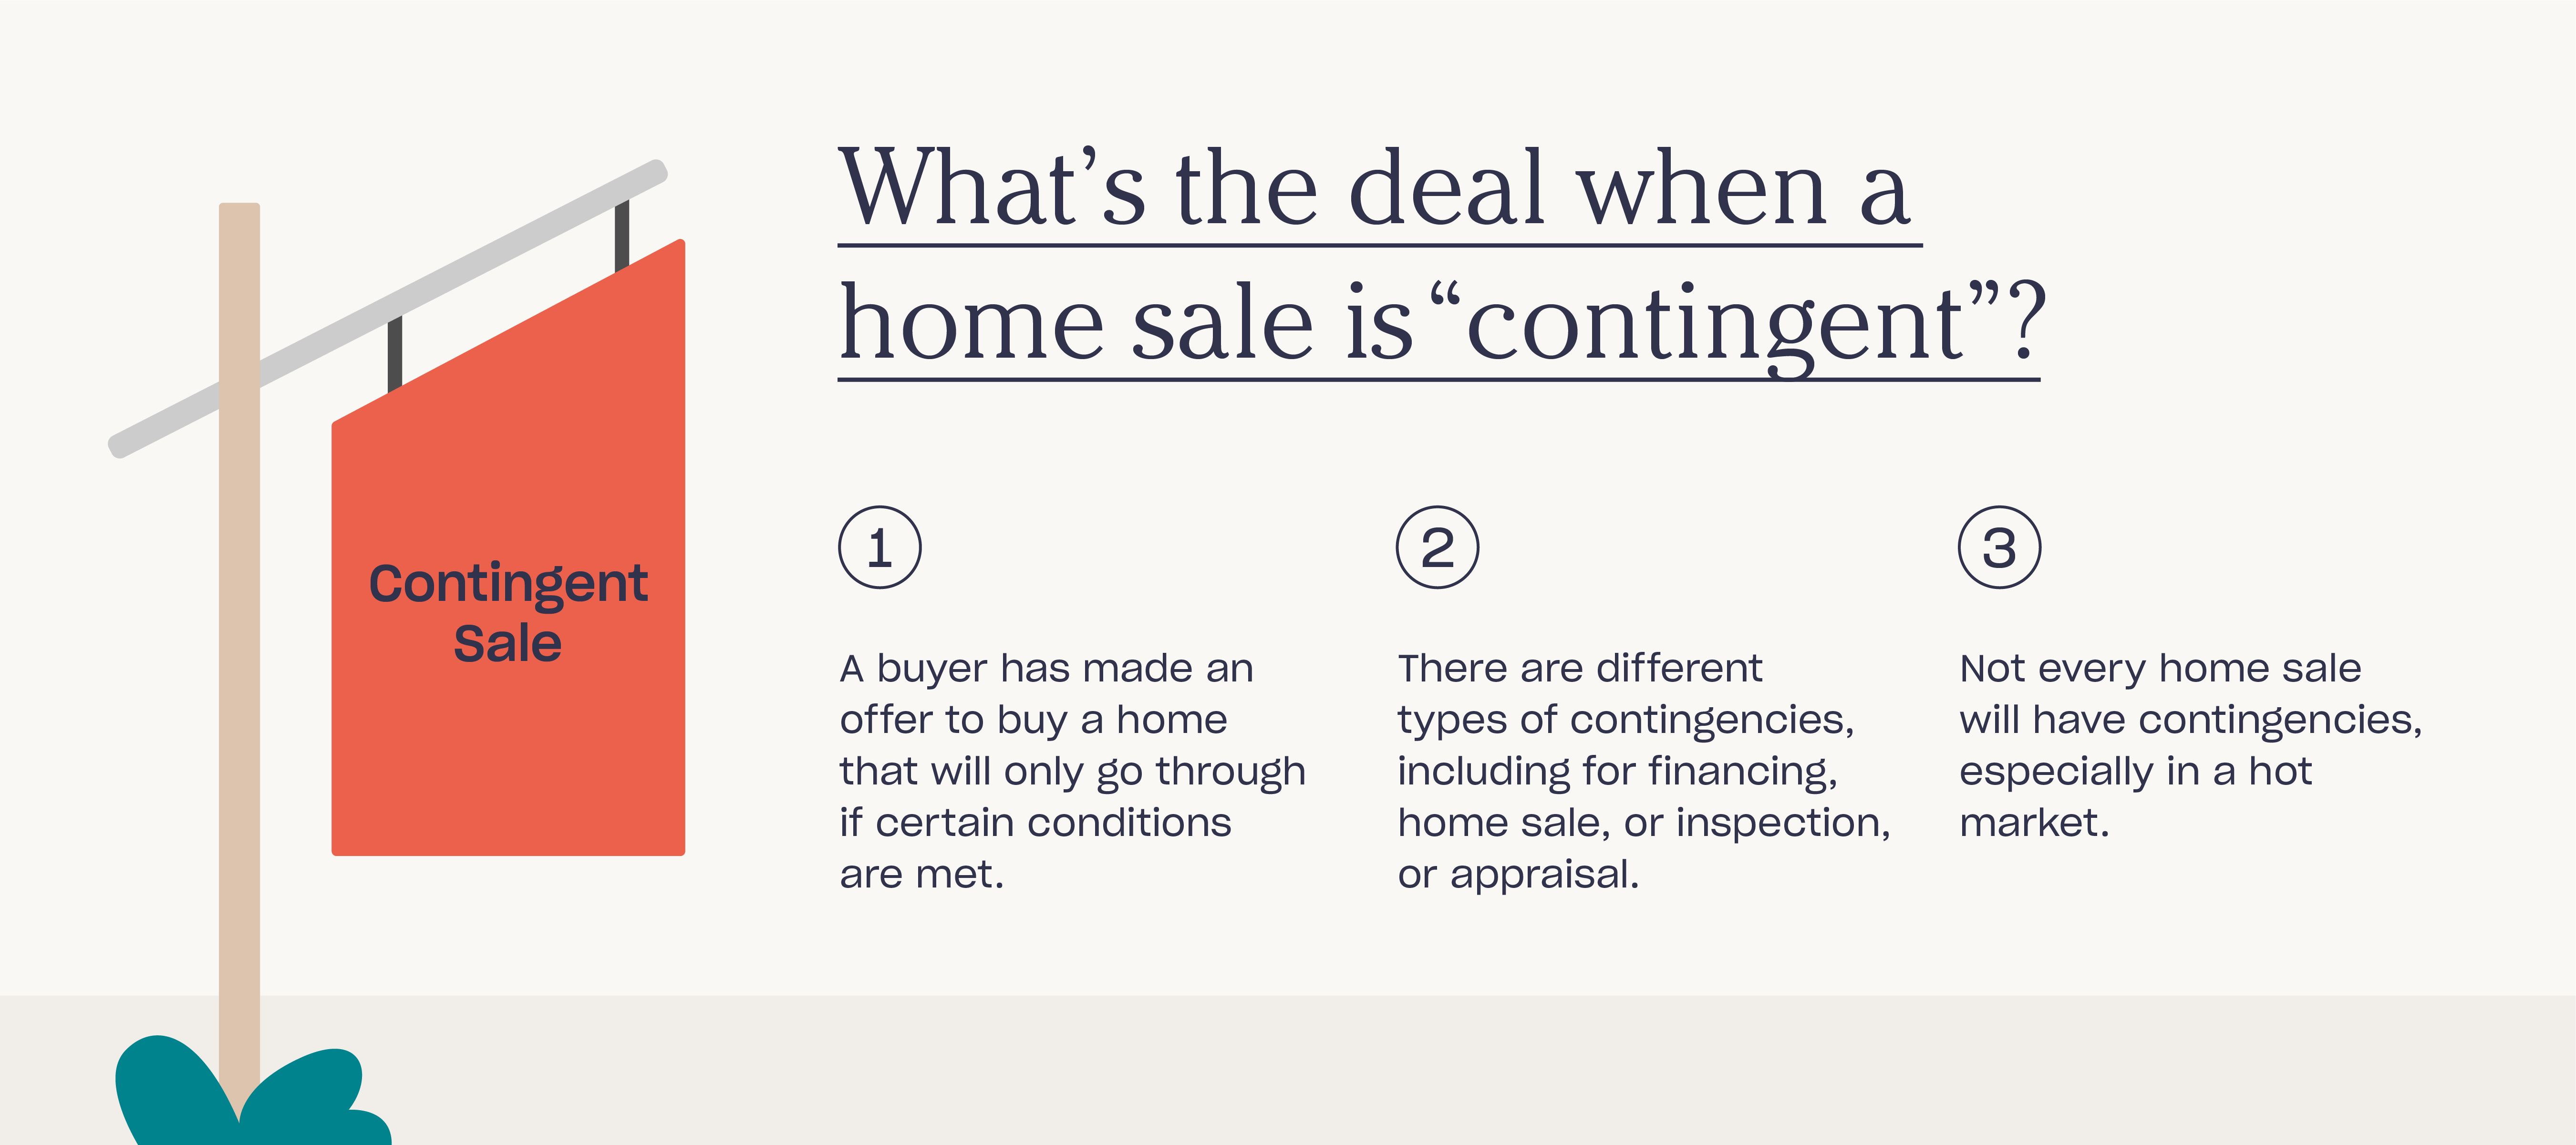 What does contingent mean when a house is for sale